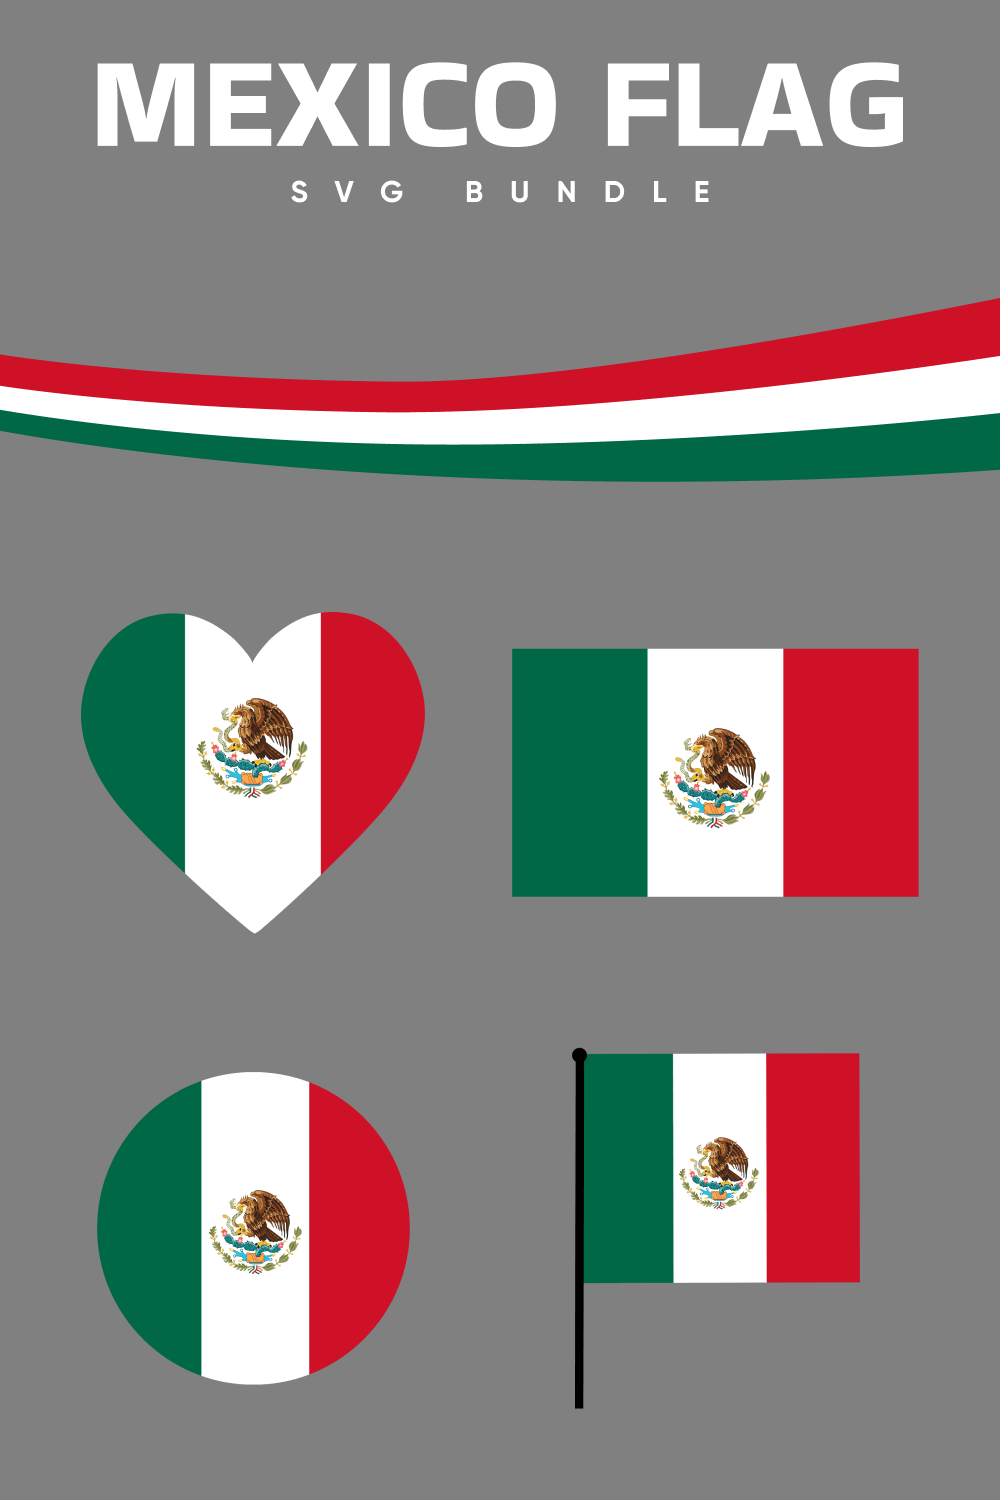 Mexico Flag in Grey Background.